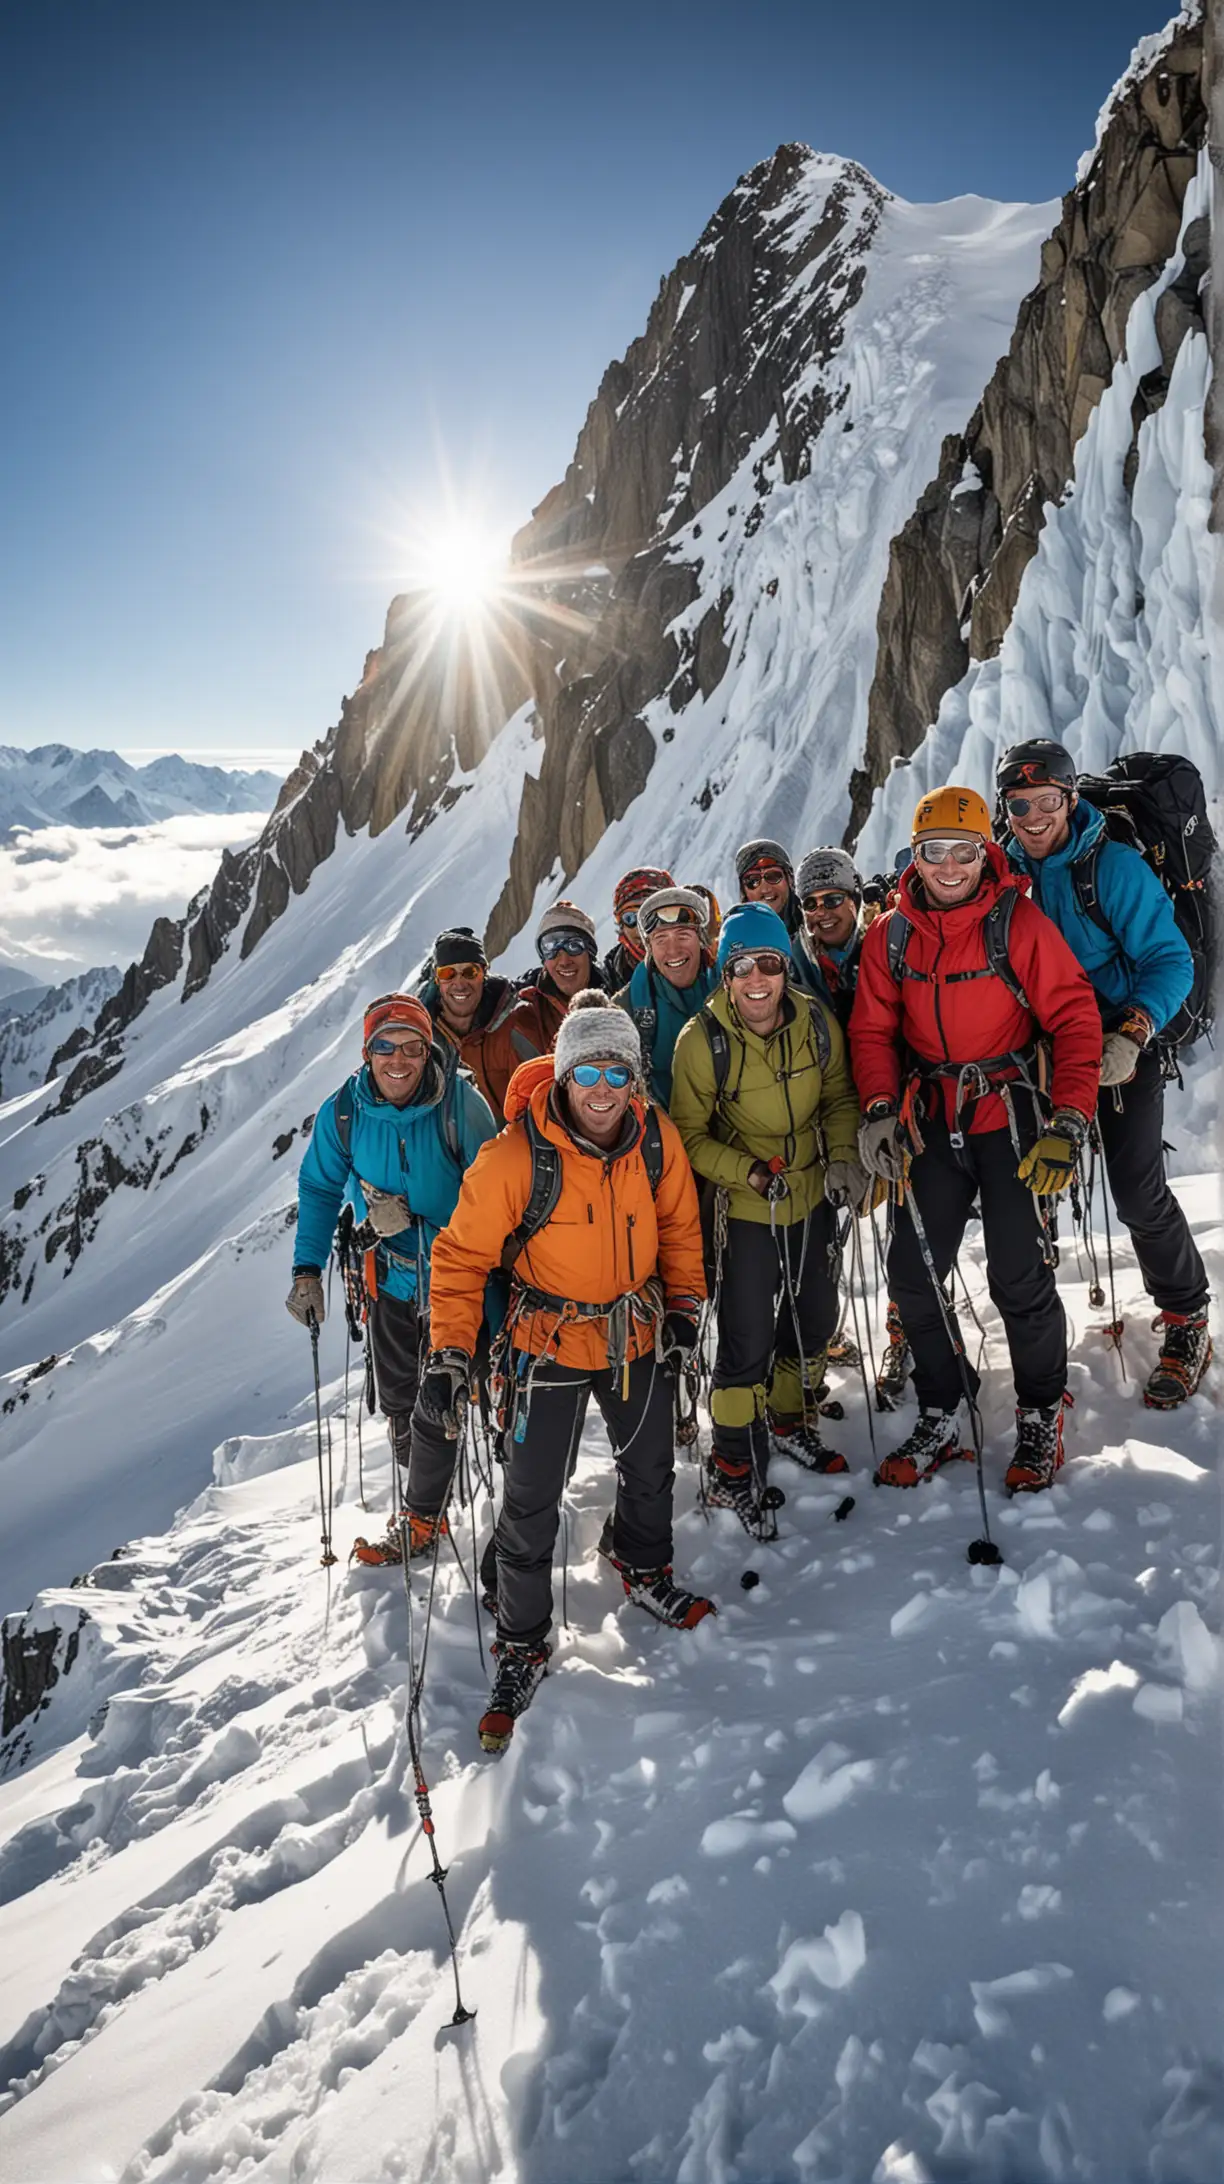 A group of nine alpine climbers, dressed in winter gear, stands together on a snow-covered mountain peak, posing for a group photo. They are smiling and visibly excited, with the vast expanse of rugged, snow-capped mountains stretching out behind them under a clear blue sky. The sunlight glistens on the snow, and their breath is visible in the cold air. Some climbers hold ski poles or ice axes, and a few have backpacks and climbing ropes. The scene captures the camaraderie and thrill of the high-altitude adventure.